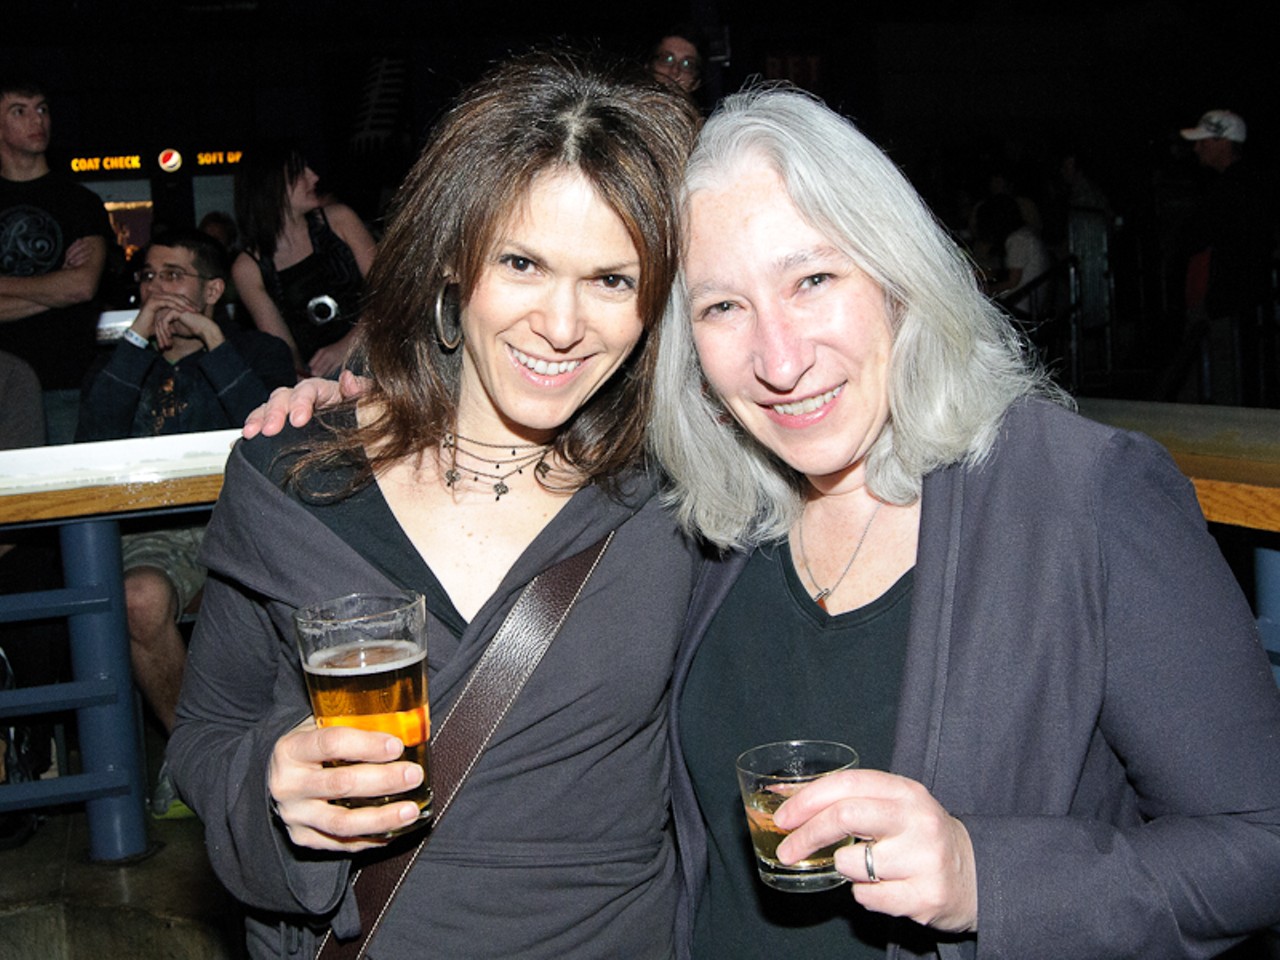 Karen Tedesco and Liza Finkel, looking for nothing more than a fun night out.